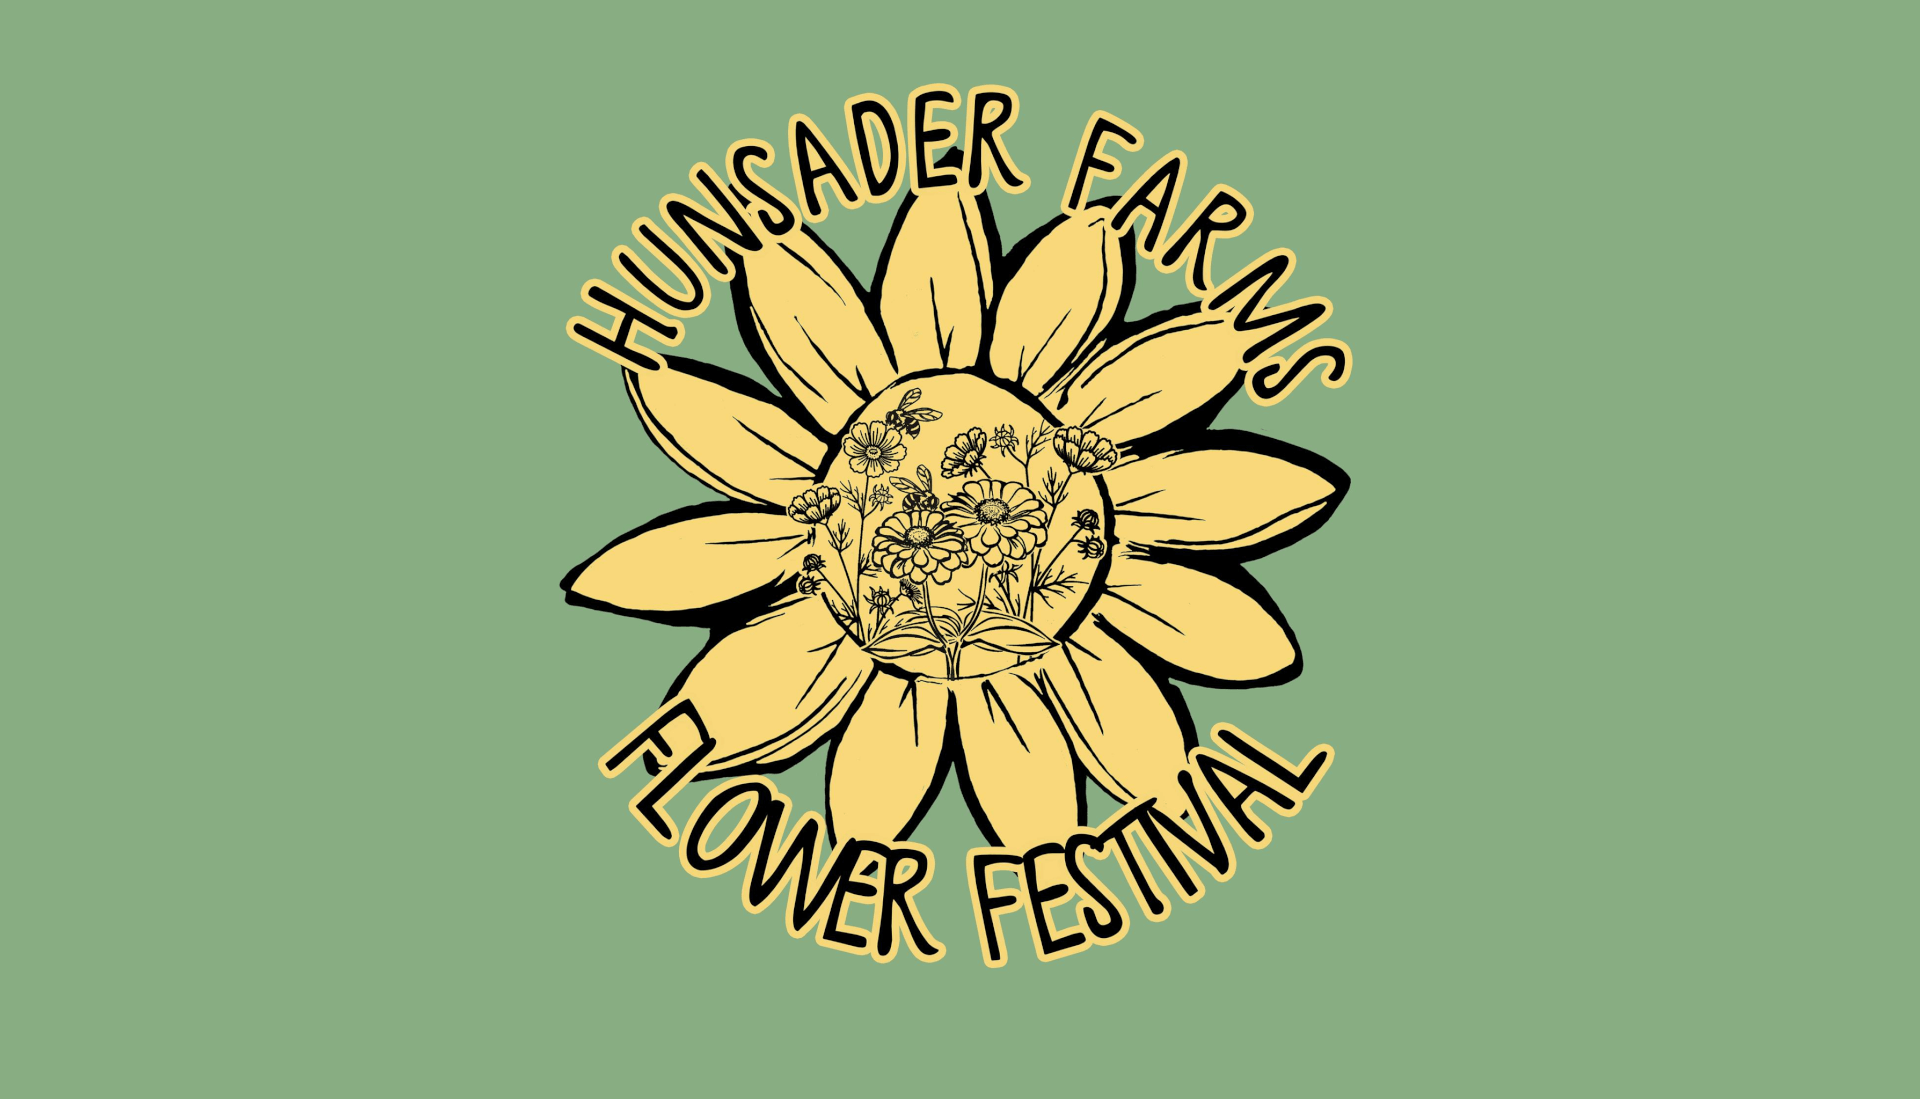 Hunsader Farms Flower Festival logo in green and yellow